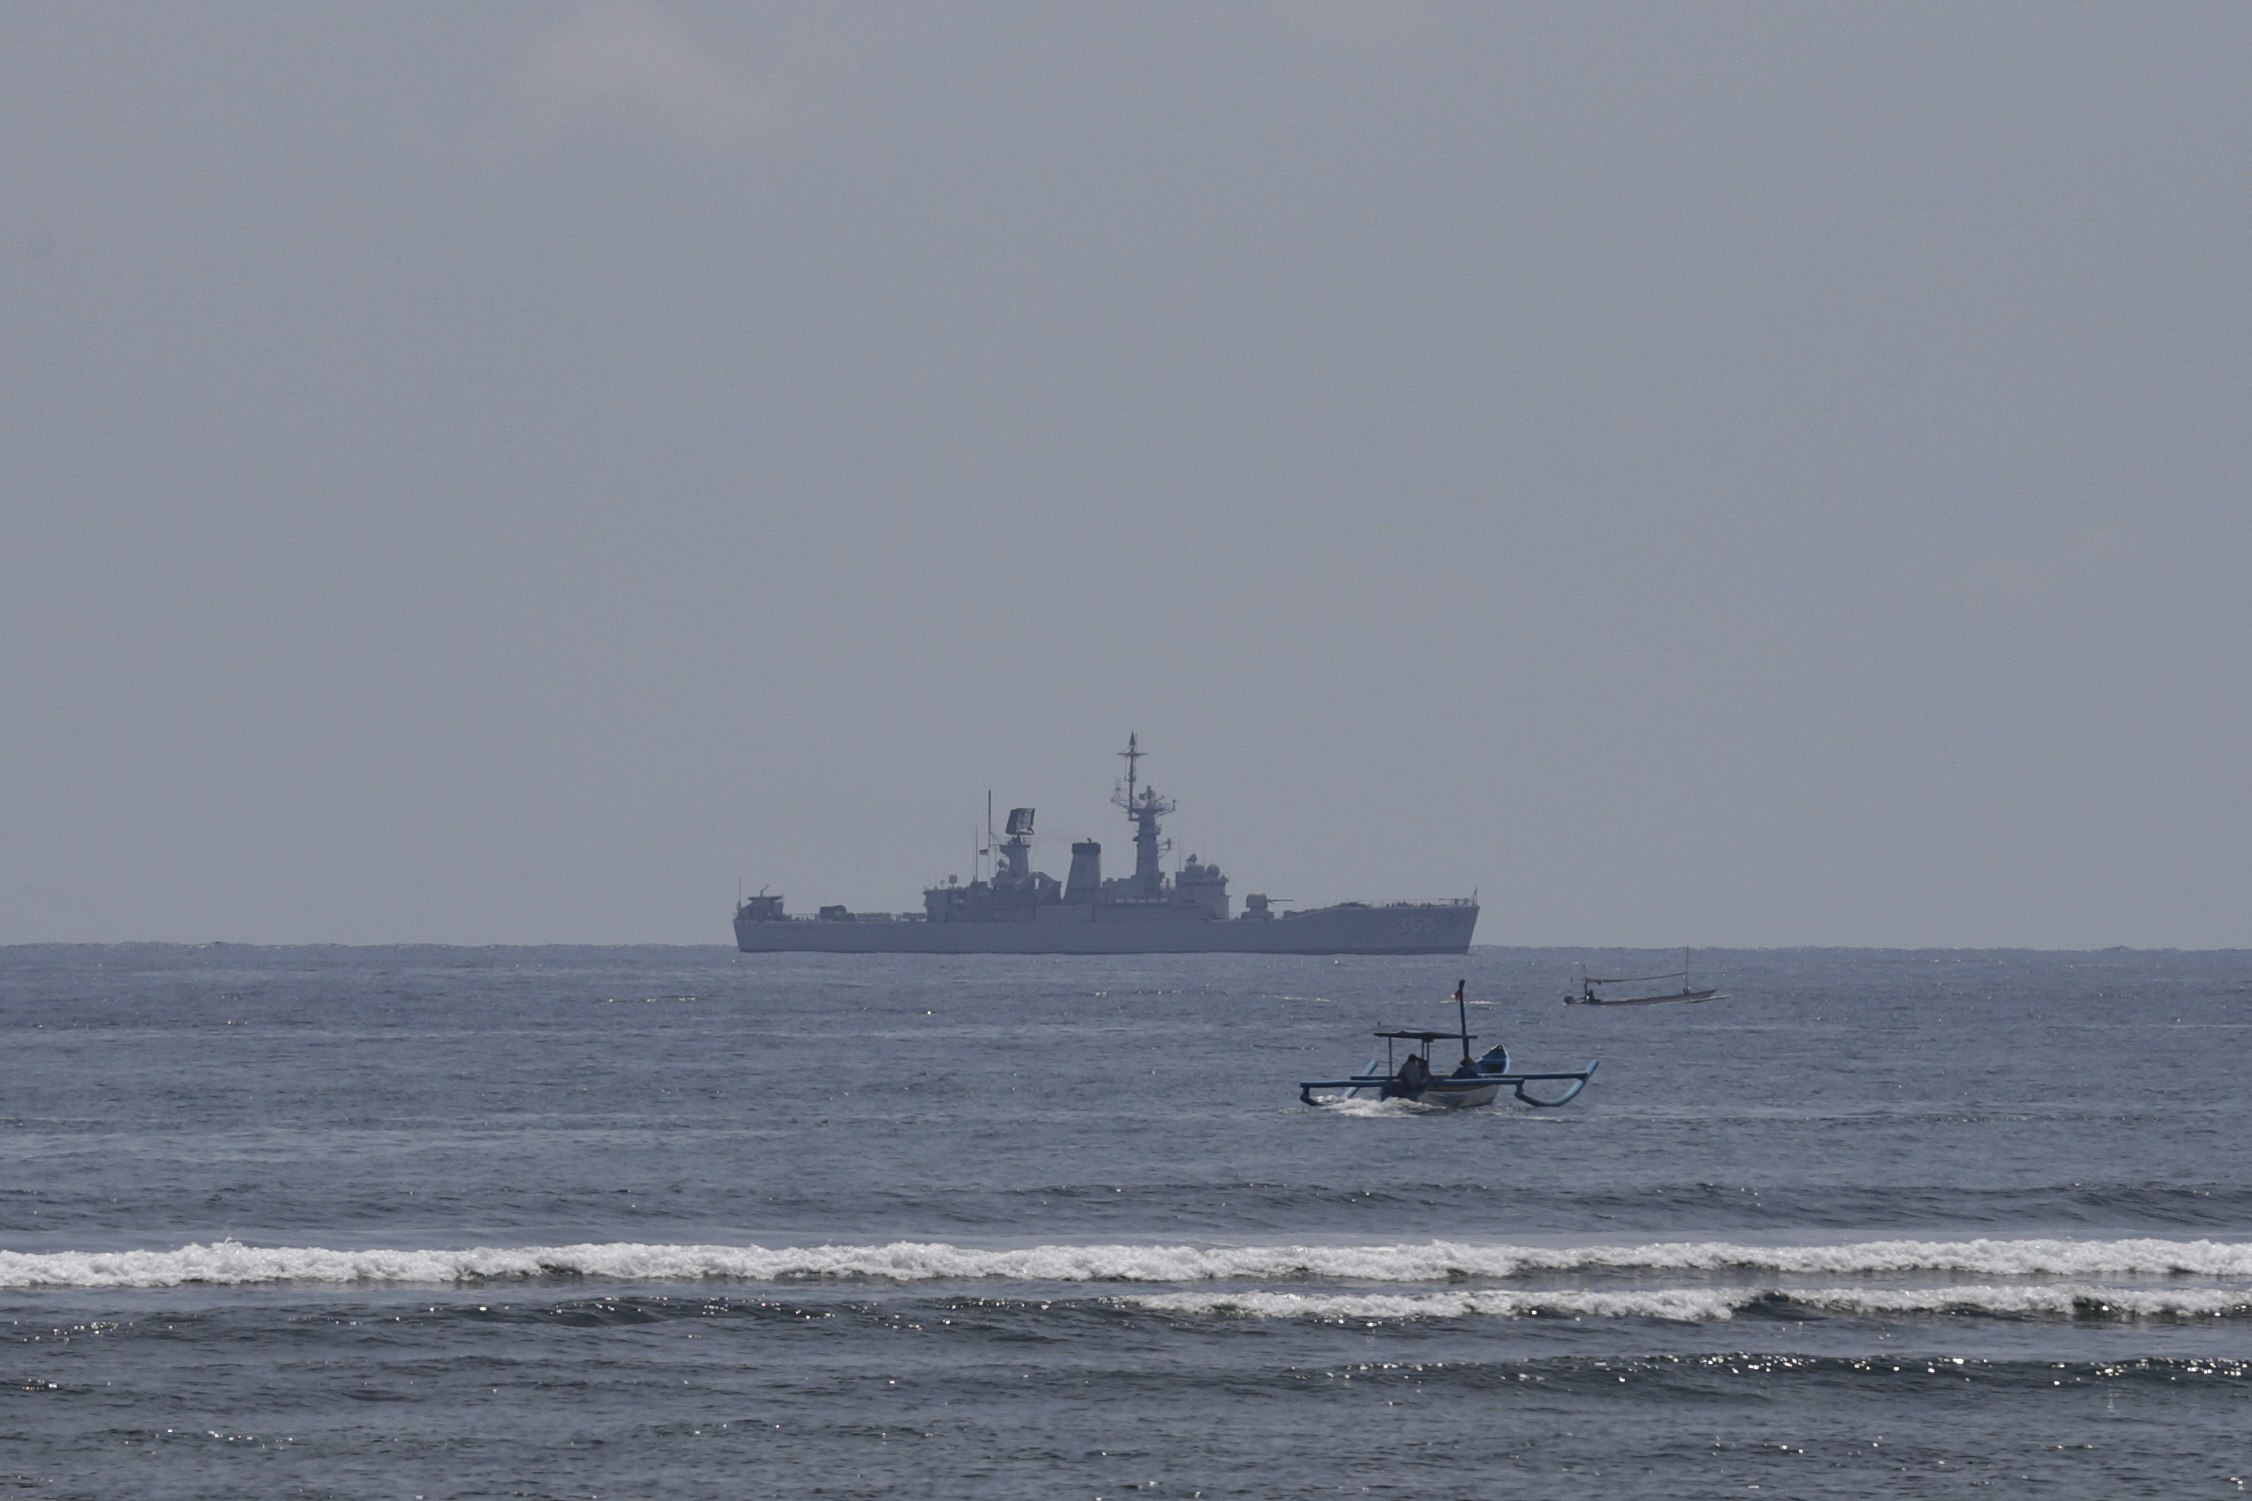 Fishing boats sail past as an Indonesian Navy ship patrols in the water off Nusa Dua, Bali. Indonesia’s drills come as China and the United States ramp up military diplomacy in the region. Photo: EPA-EFE